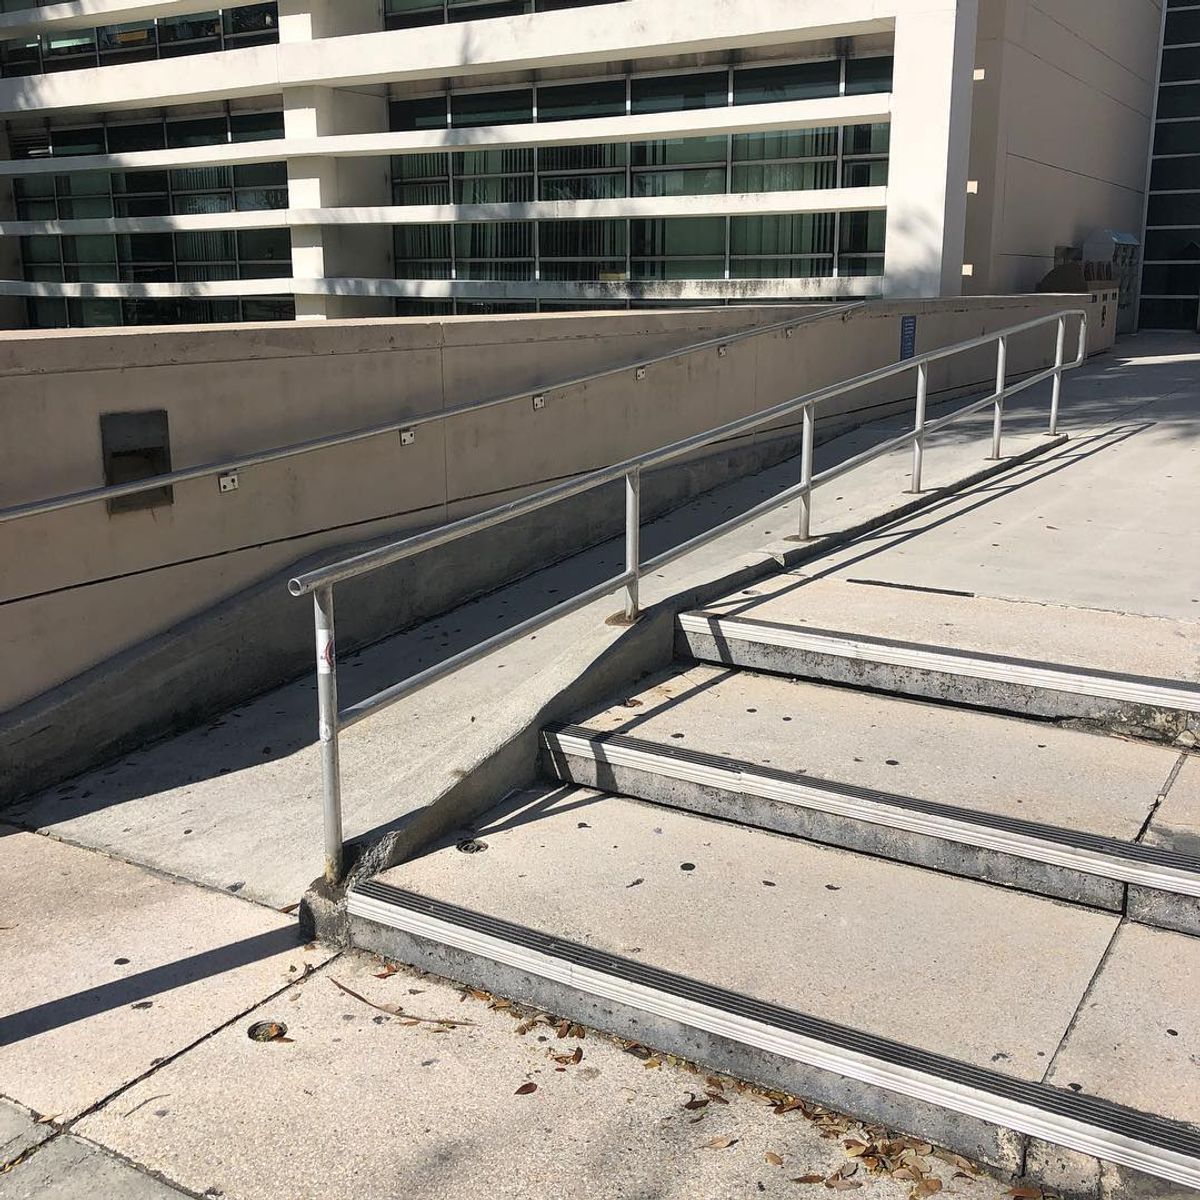 Image for skate spot FAU - Wimberly Library 3 Stair Out Rail